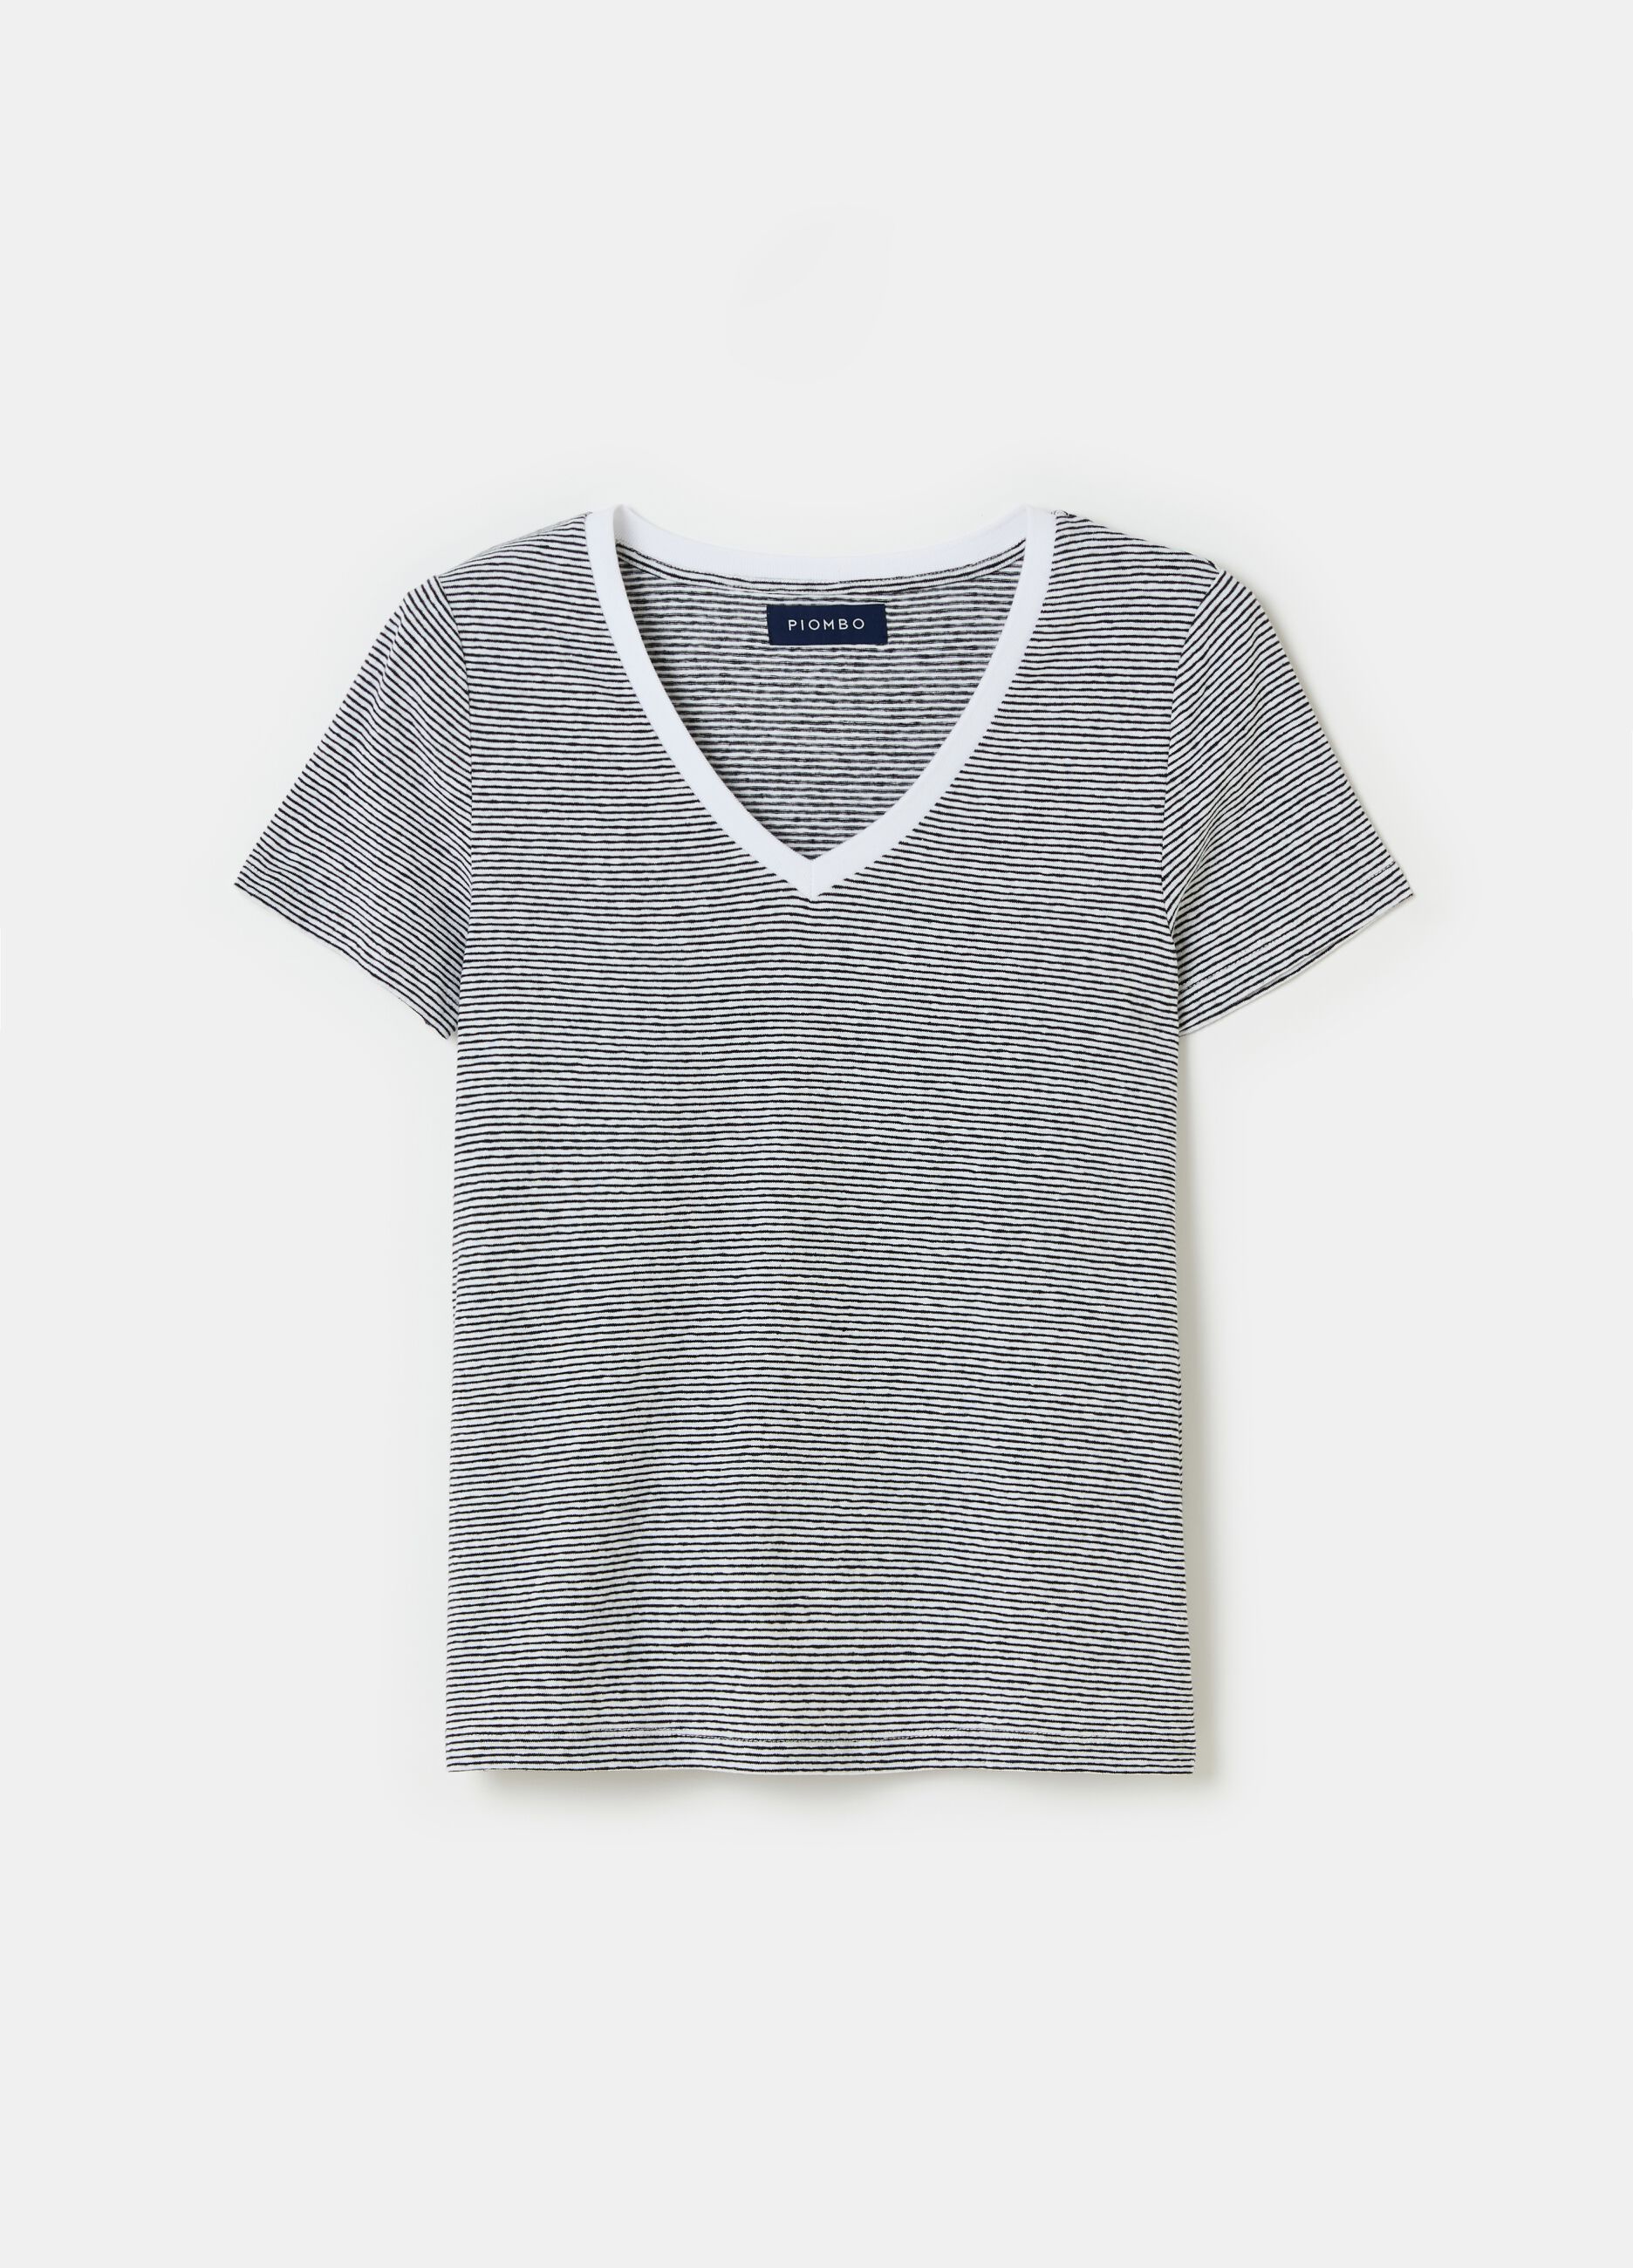 Contemporary T-shirt with thin stripes